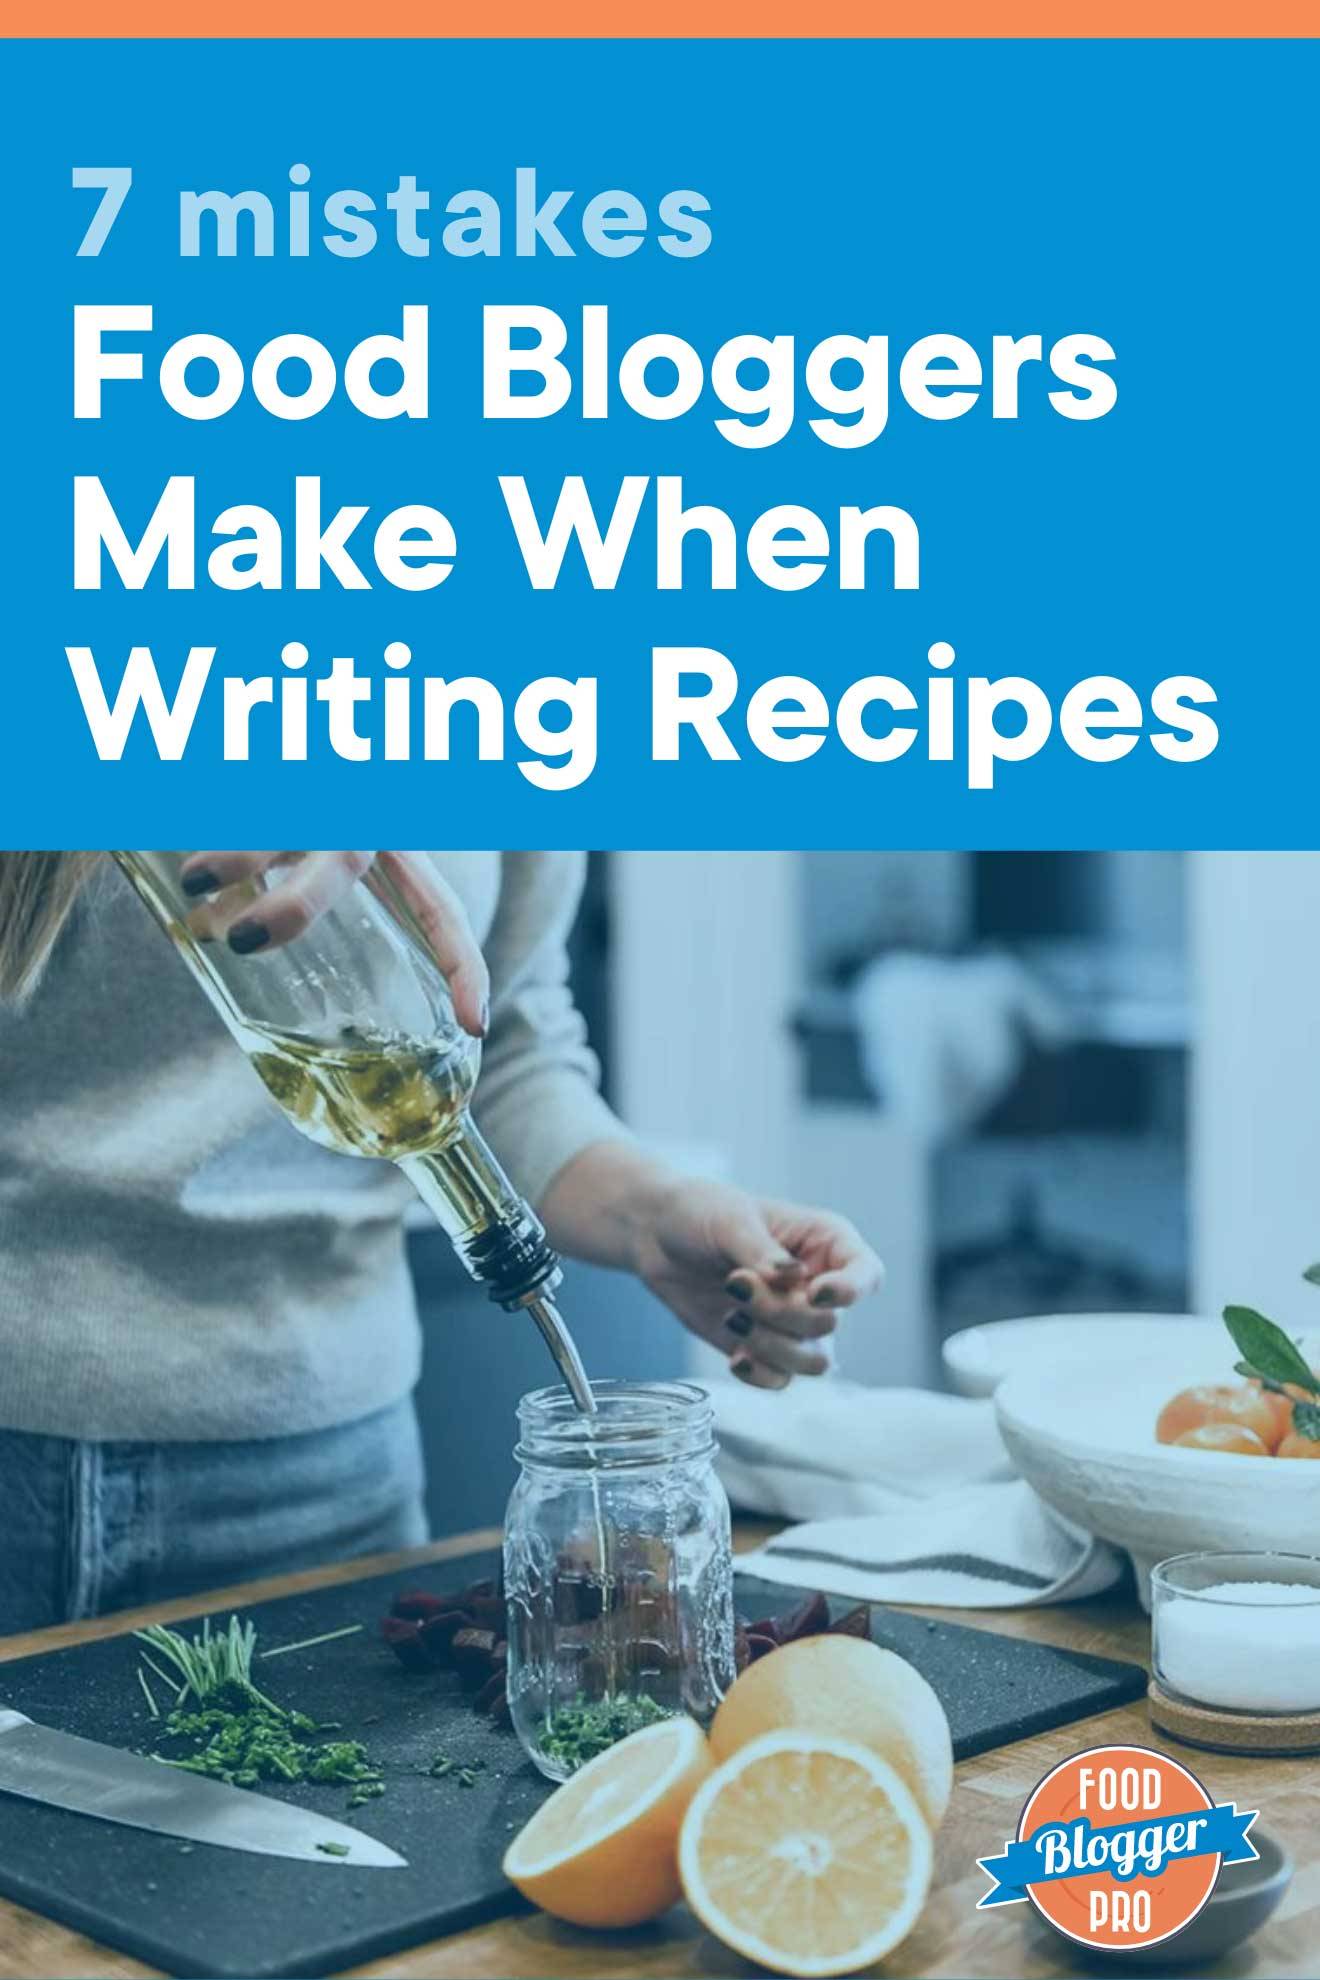 A person pouring olive oil into a jar with the text "7 Mistakes Food Bloggers Make When Writing Recipes" at the top of the photo and the Food Blogger Pro logo in the bottom left corner.